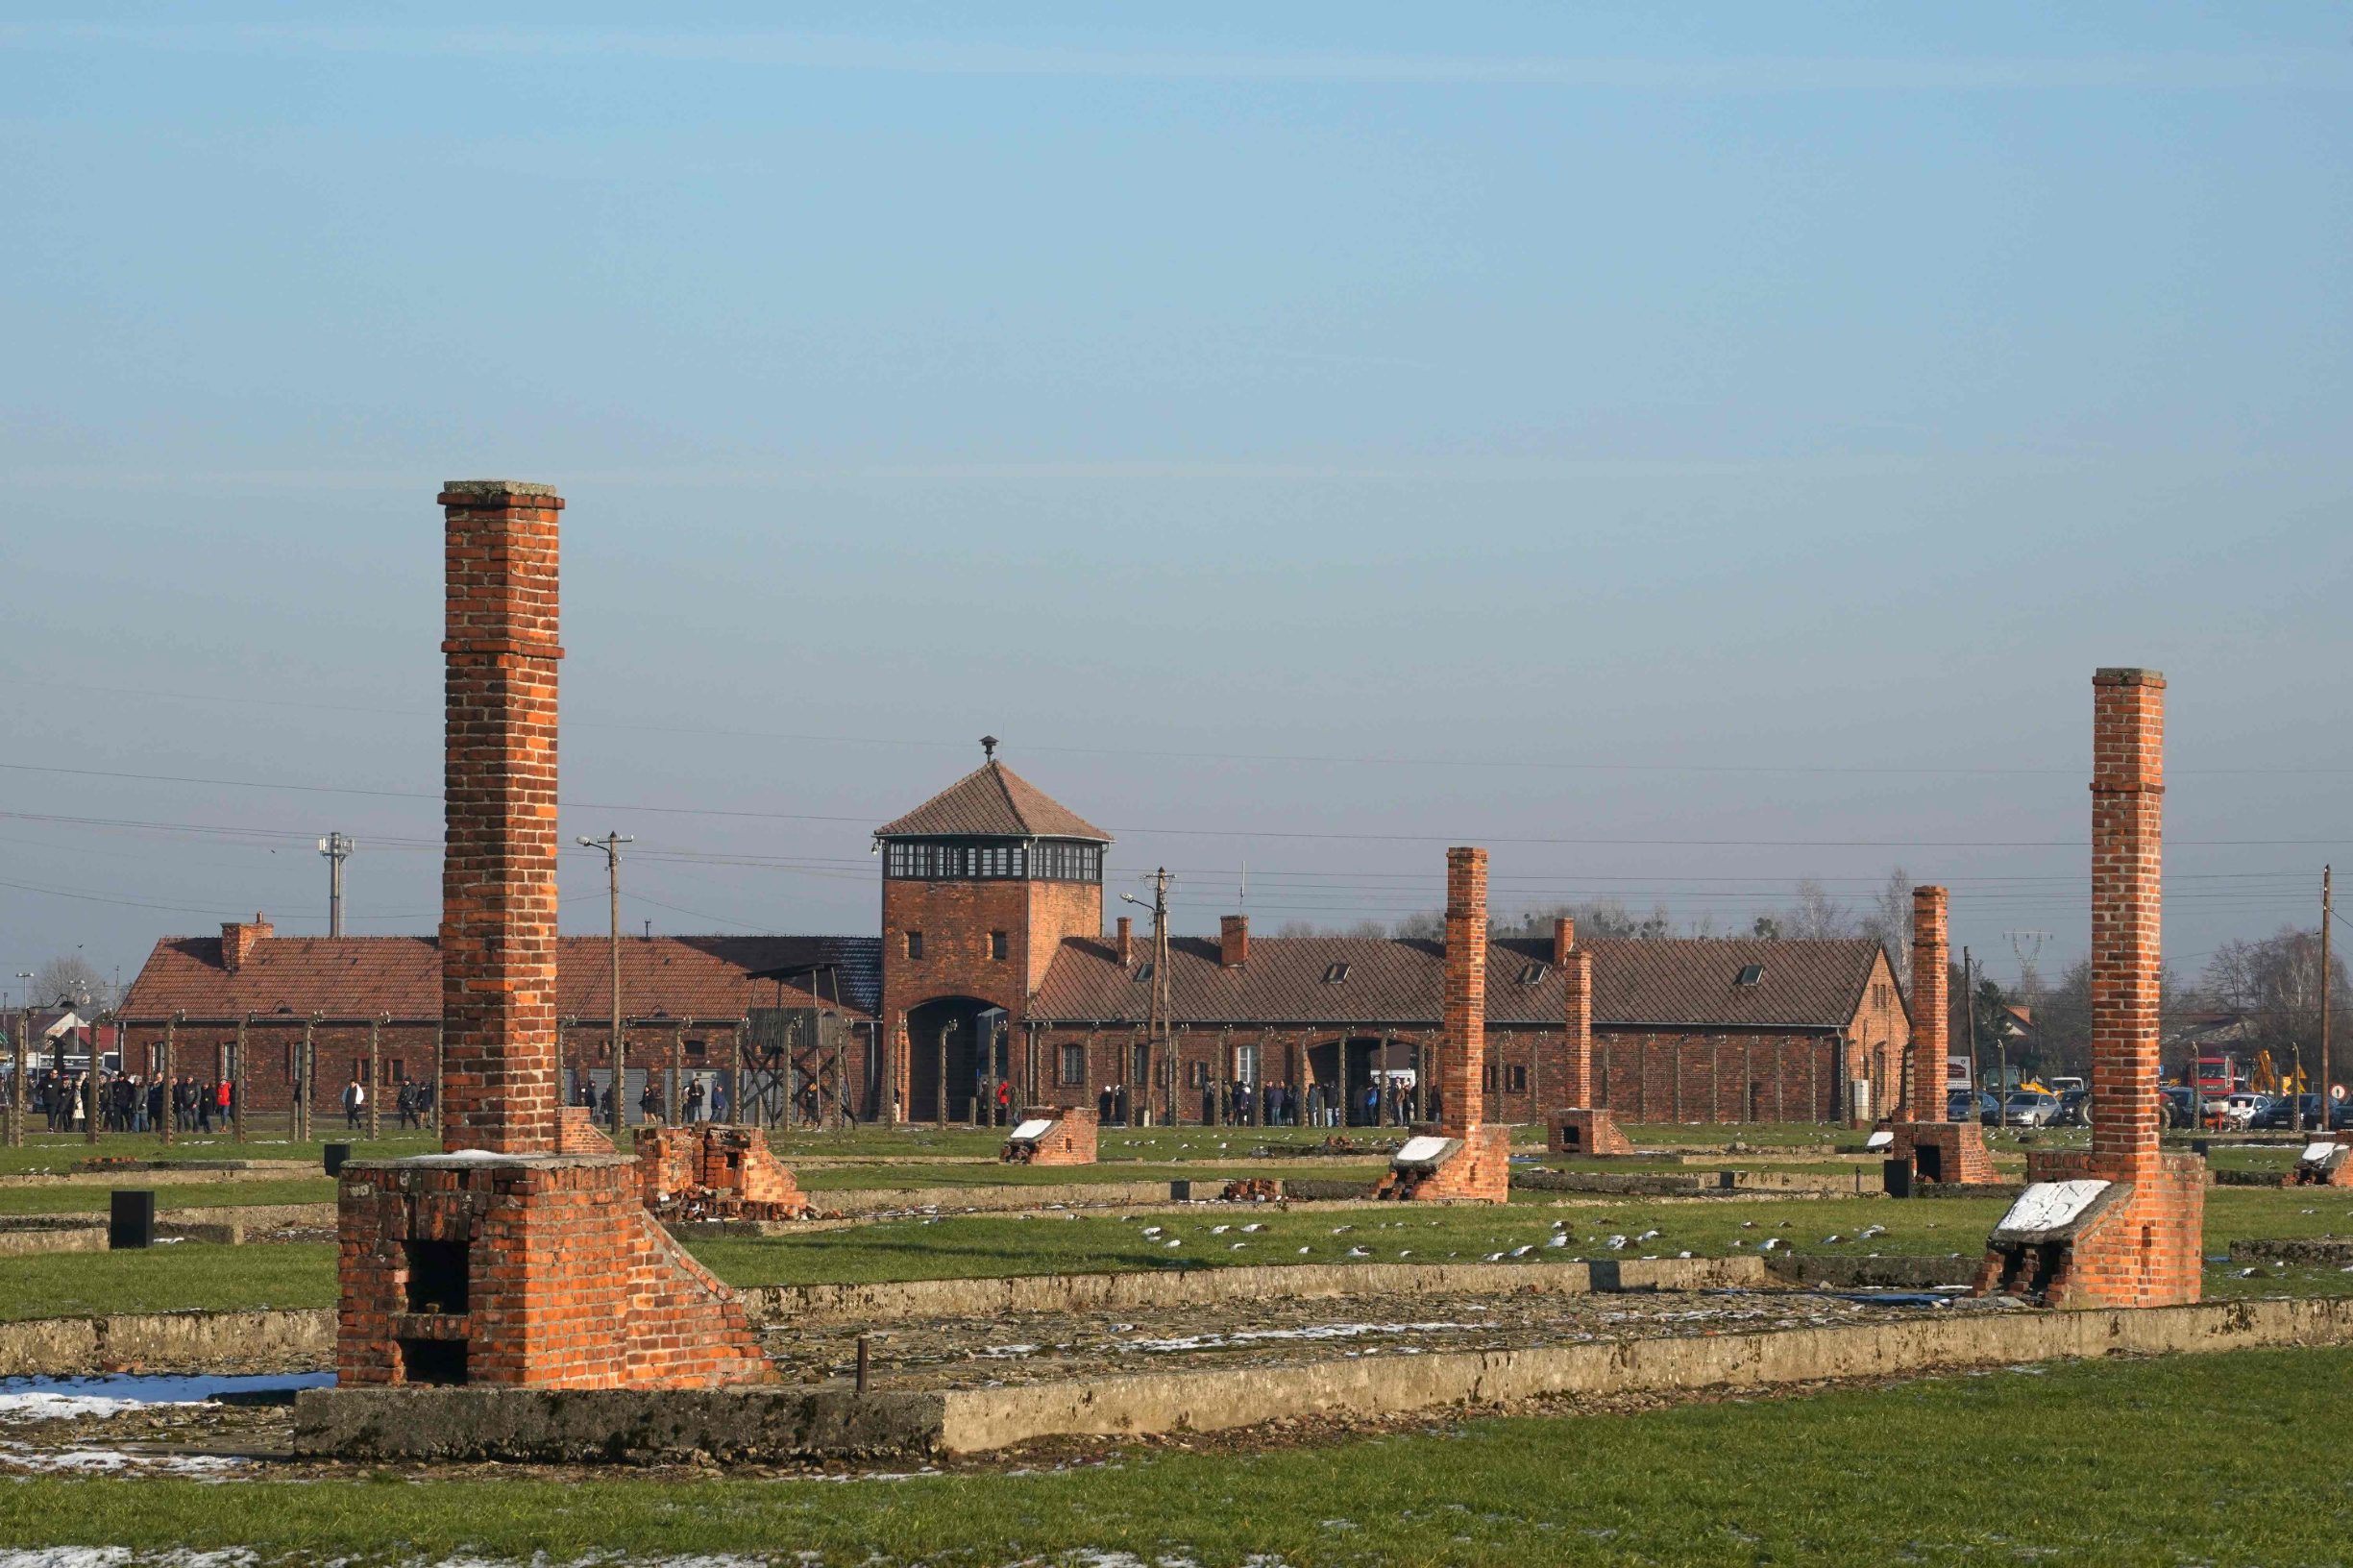 (FILES) The remains of the barracks and the main building of the Auschwitz-Birkenau German Nazi death camp are pictured ahead of German Chancellor Angela Merkel's landmark visit in Oswiecim, Poland, on December 5, 2019. - Some two hundred former prisoners of the Nazi-run Auschwitz-Birkenau extermination camp, a symbol of the Holocaust of the Jews, will visit the site on January 27, 2020 to commemorate the 75th anniversary of its liberation. (Photo by JANEK SKARZYNSKI / AFP)